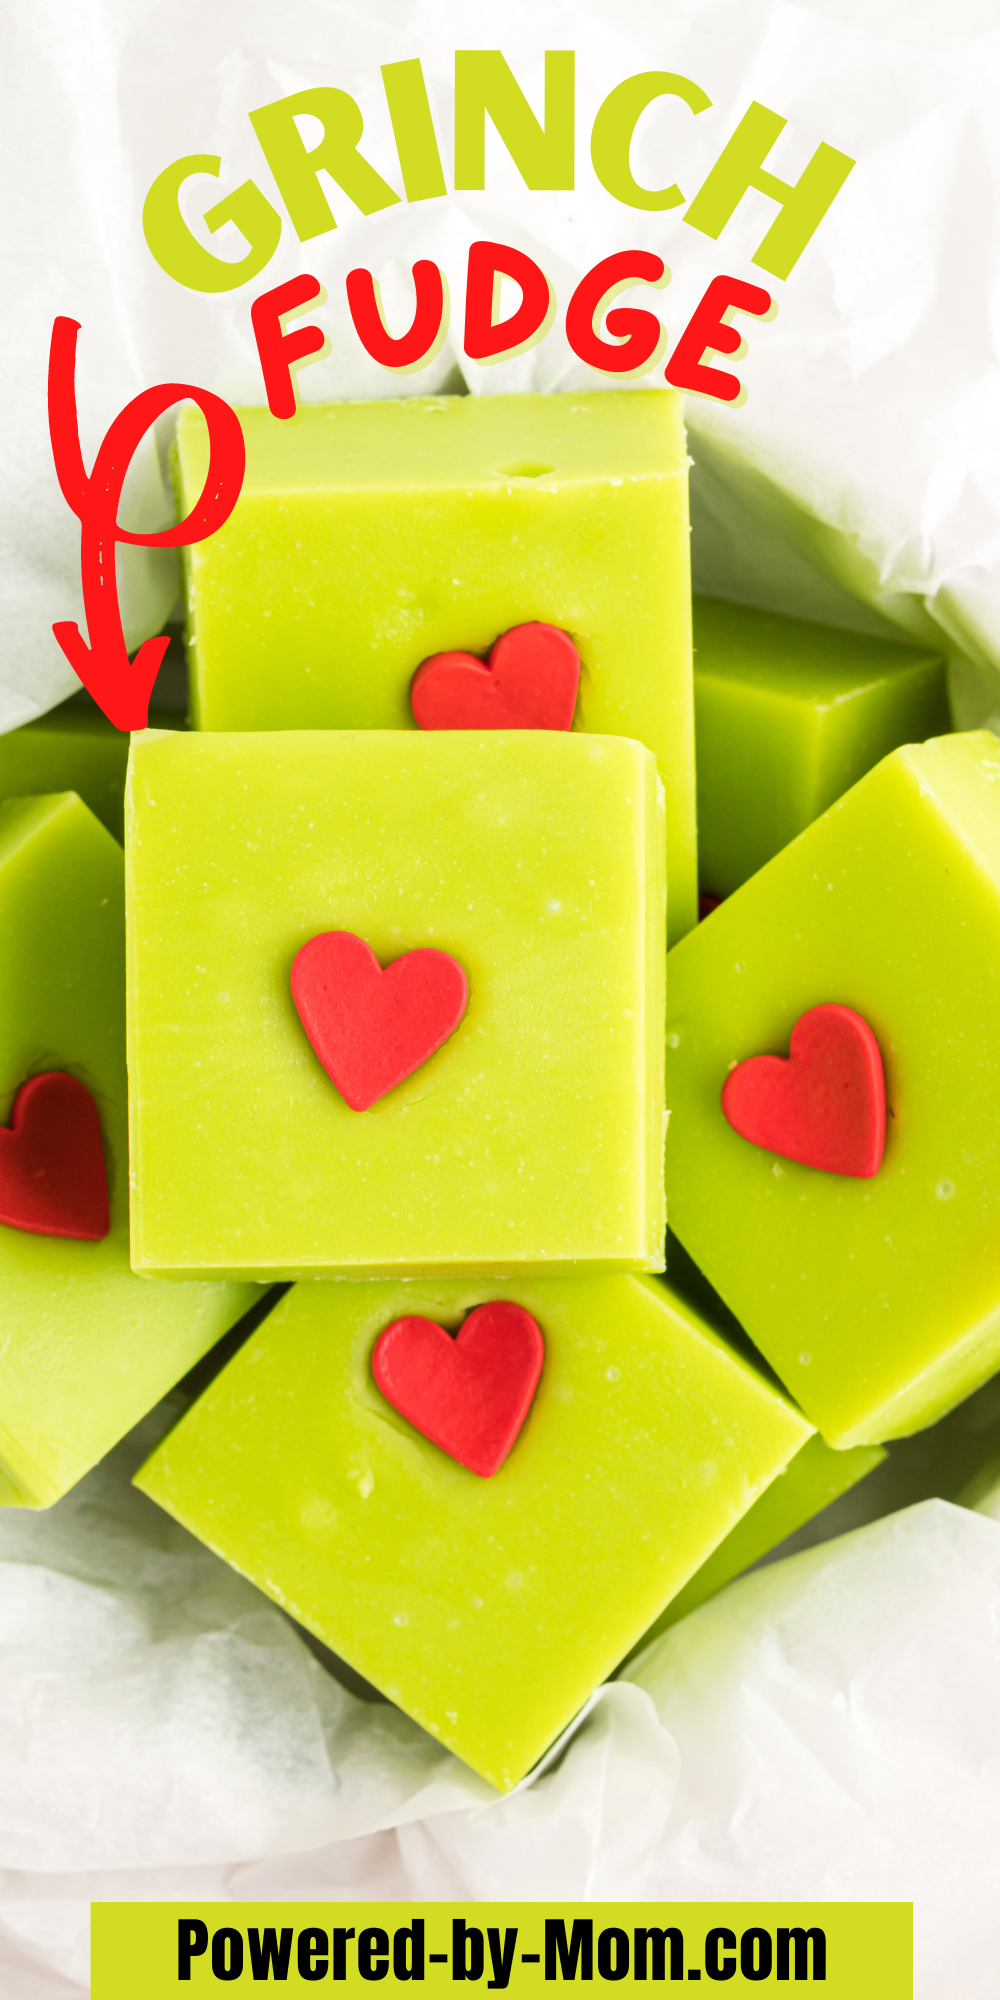 This colorful and easy Grinch Fudge is a fun, no bake holiday recipe with only FOUR ingredients. It's a recipe for Christmas fudge that is prepped to set in the fridge in minutes and makes for a delicious family treat. 